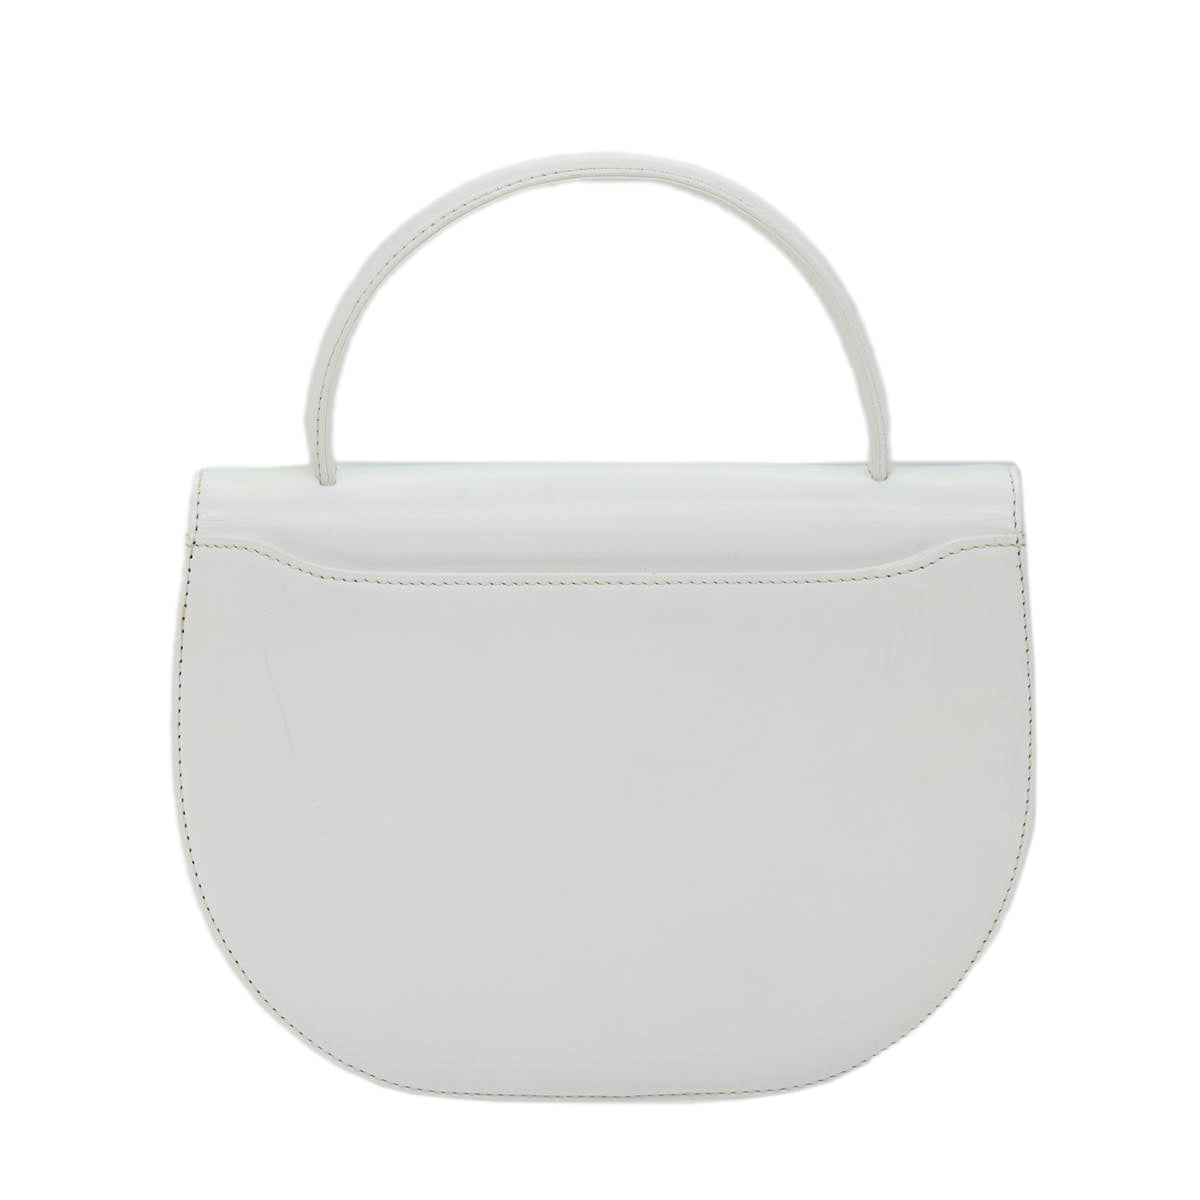 GIVENCHY Hand Bag Leather White Auth 69527 - 0